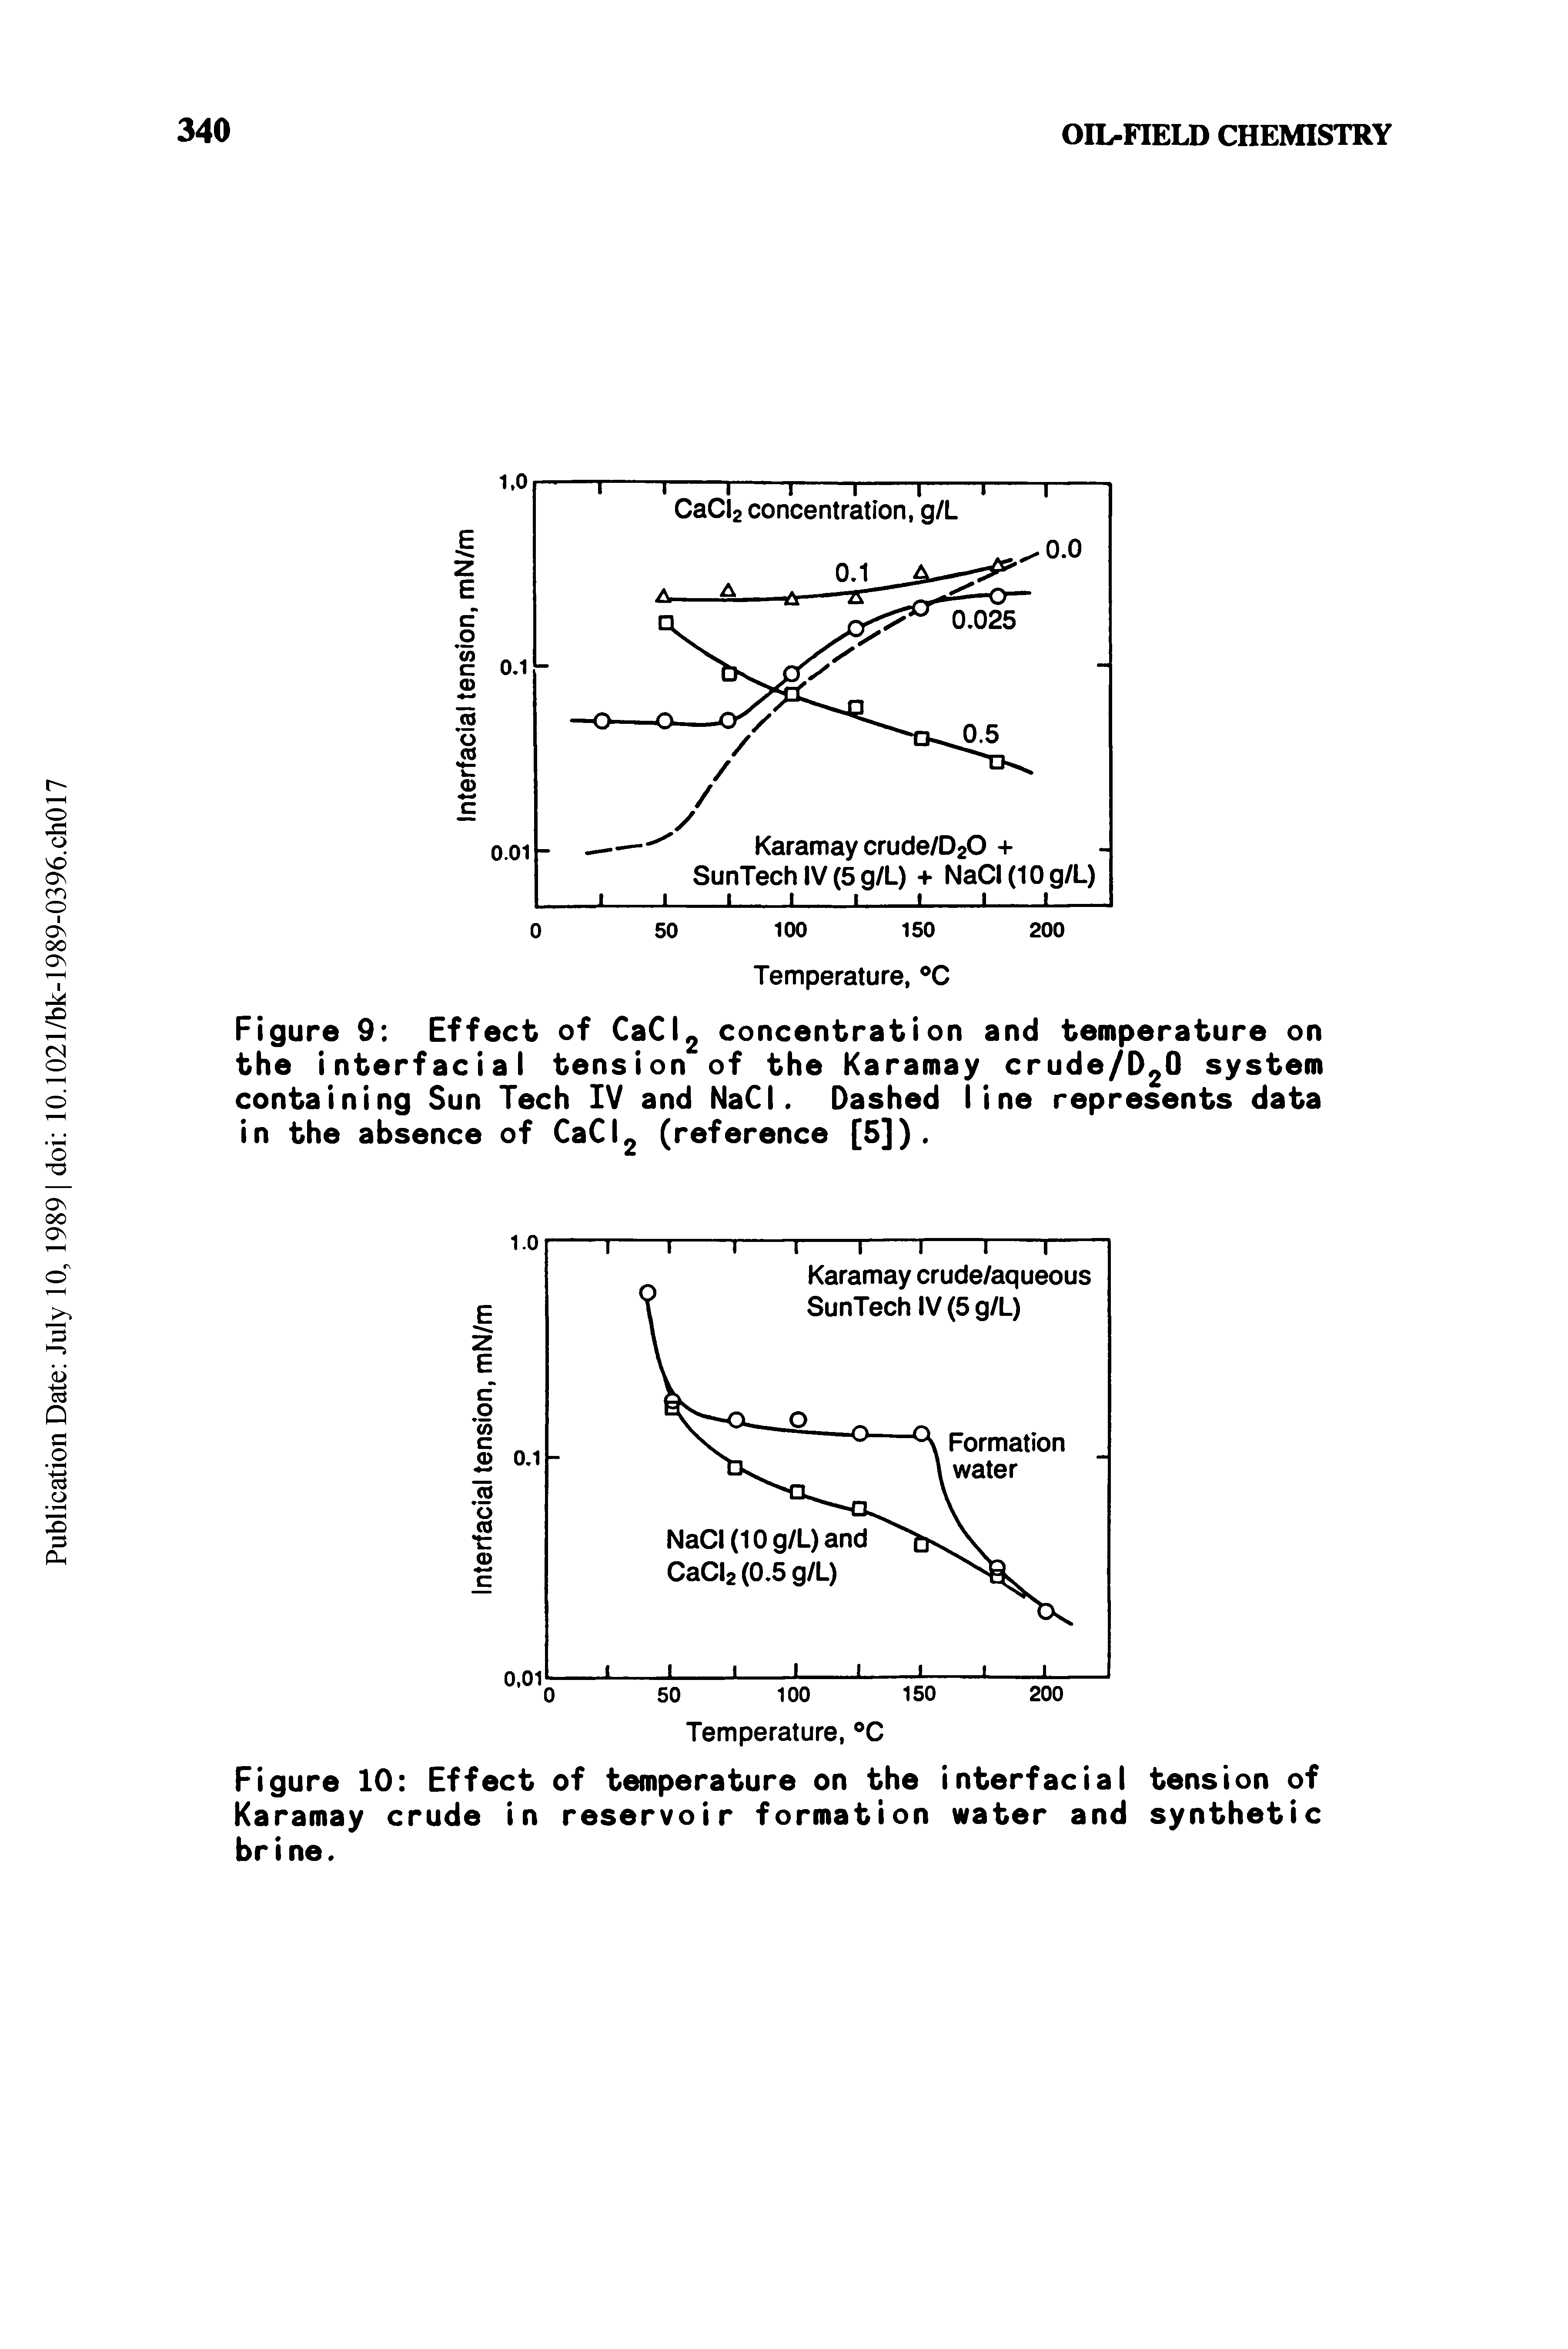 Figure 10 Effect of temperature on the interfacial tension of Karamay crude in reservoir formation water and synthetic br ine.